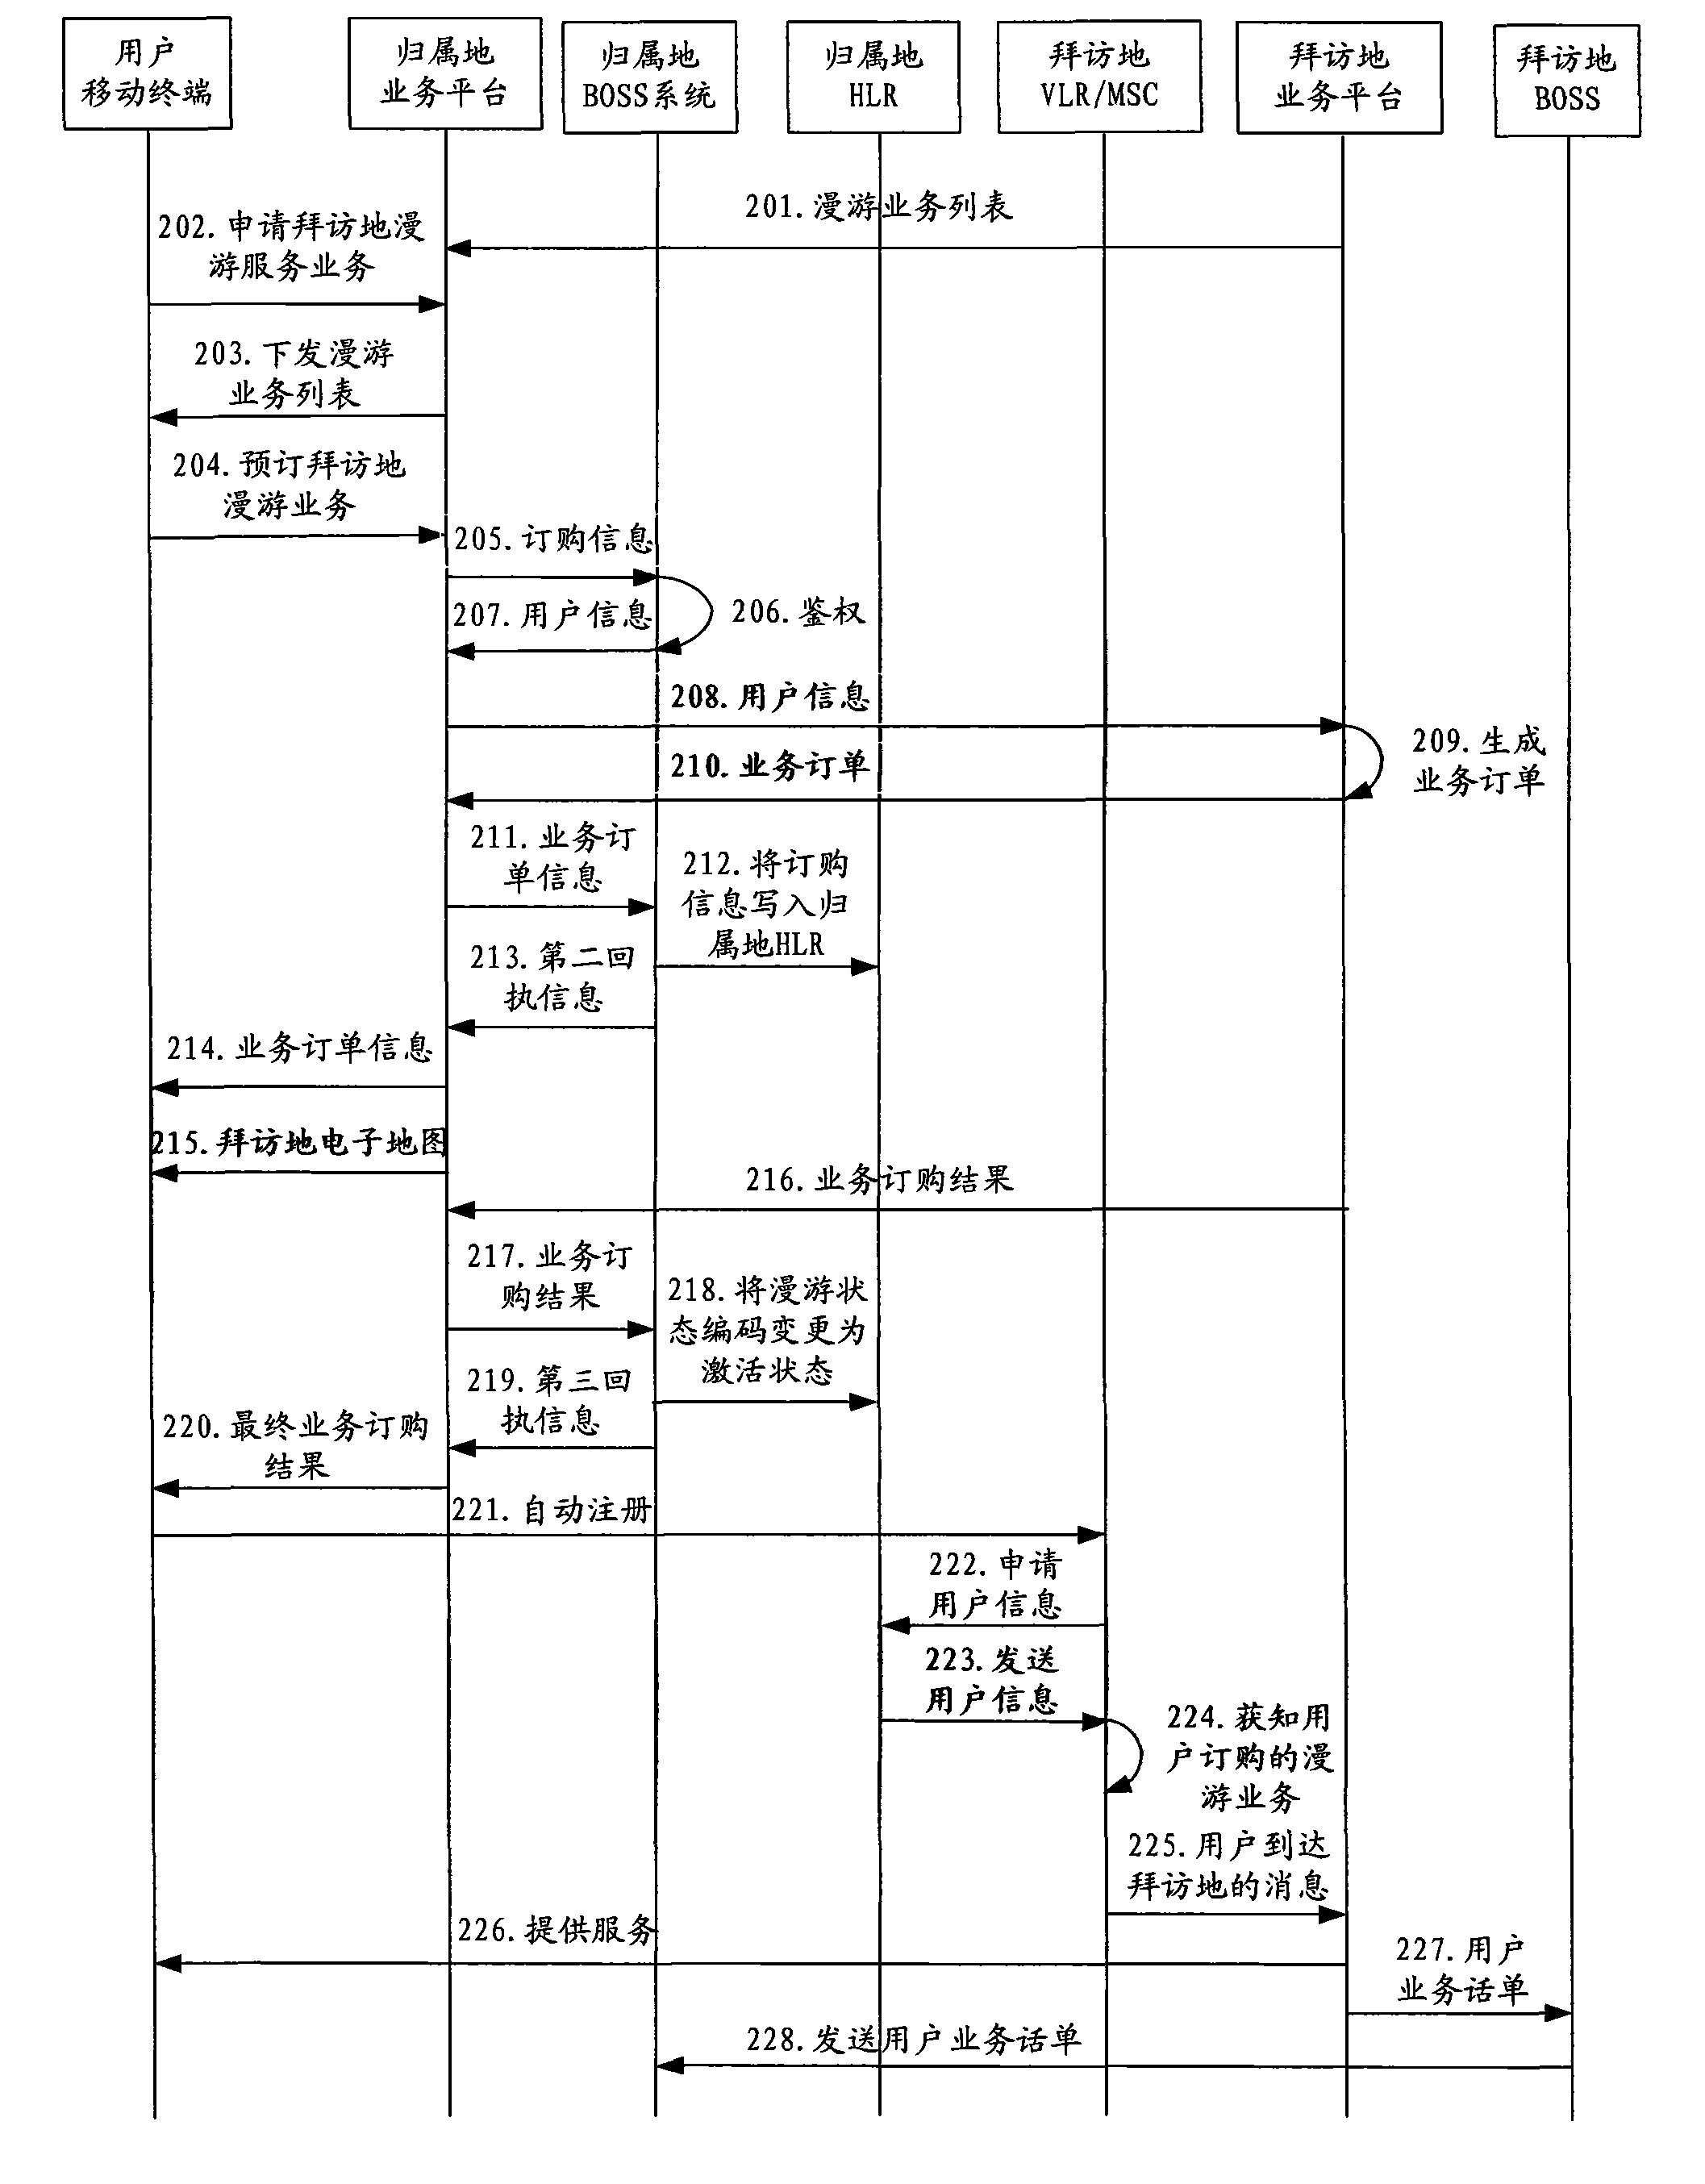 Method and system for processing roaming service